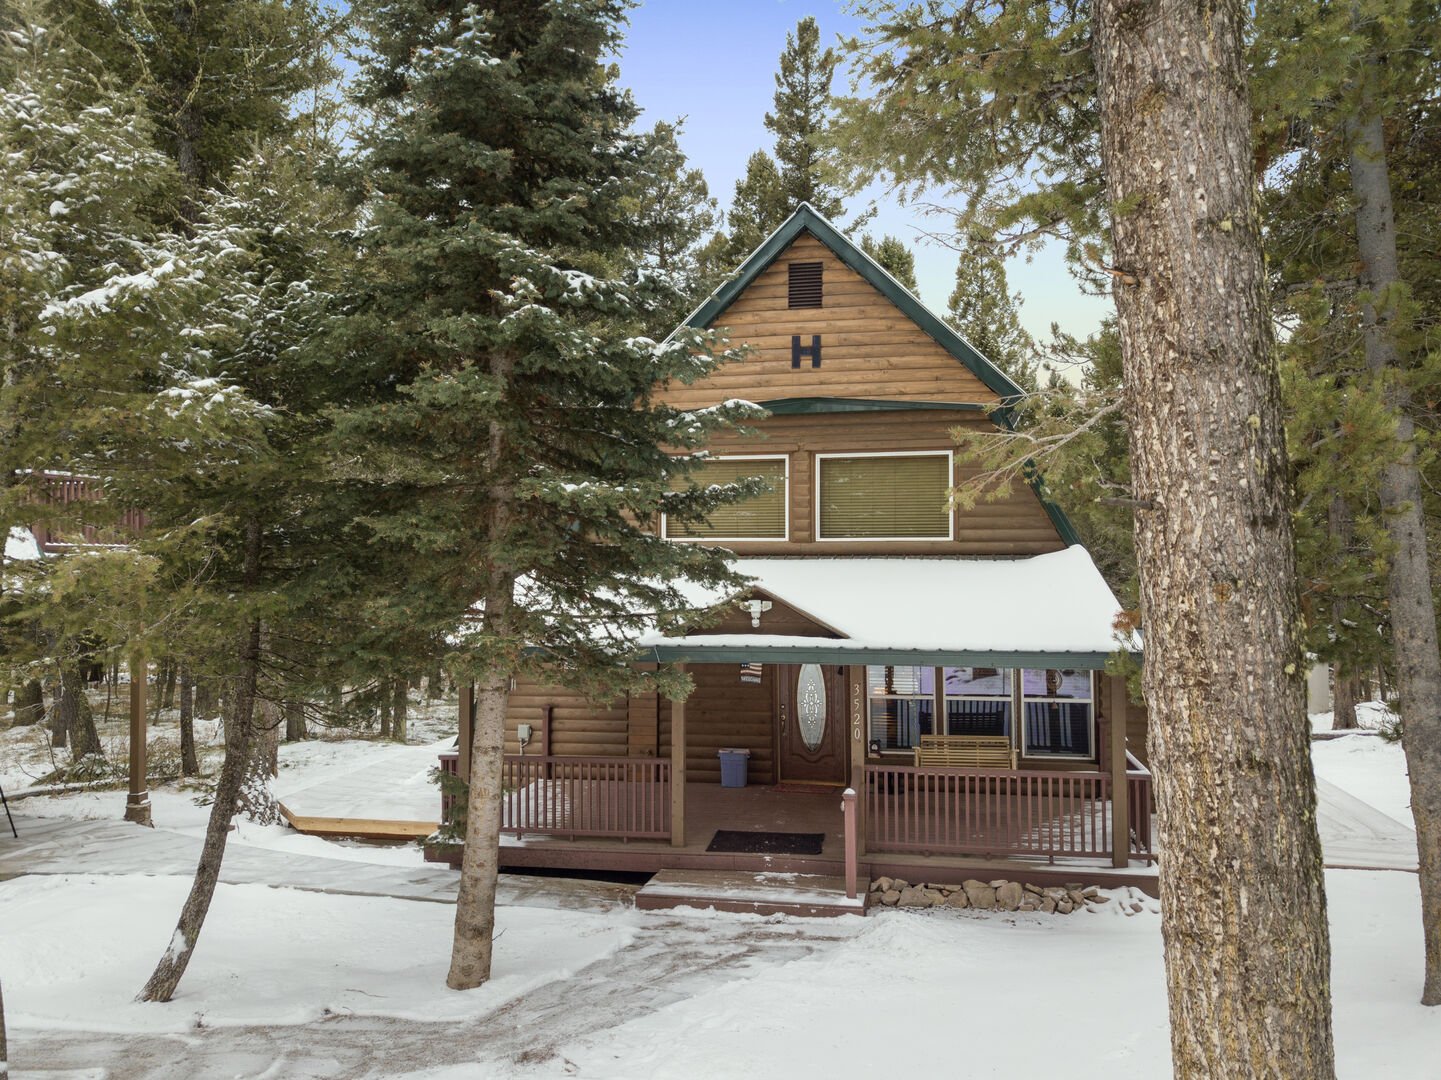 Roger Dodger ~ (TWO CABINS ON PROPERTY: MAIN CABIN AVAILABLE YEAR-ROUND AND SLEEPS 6 PEOPLE. ACCOMODATIONS ABOVE GARAGE AVAILABLE IN SUMMER ONLY AND SLEEPS ADDITIONAL 5 PEOPLE.)